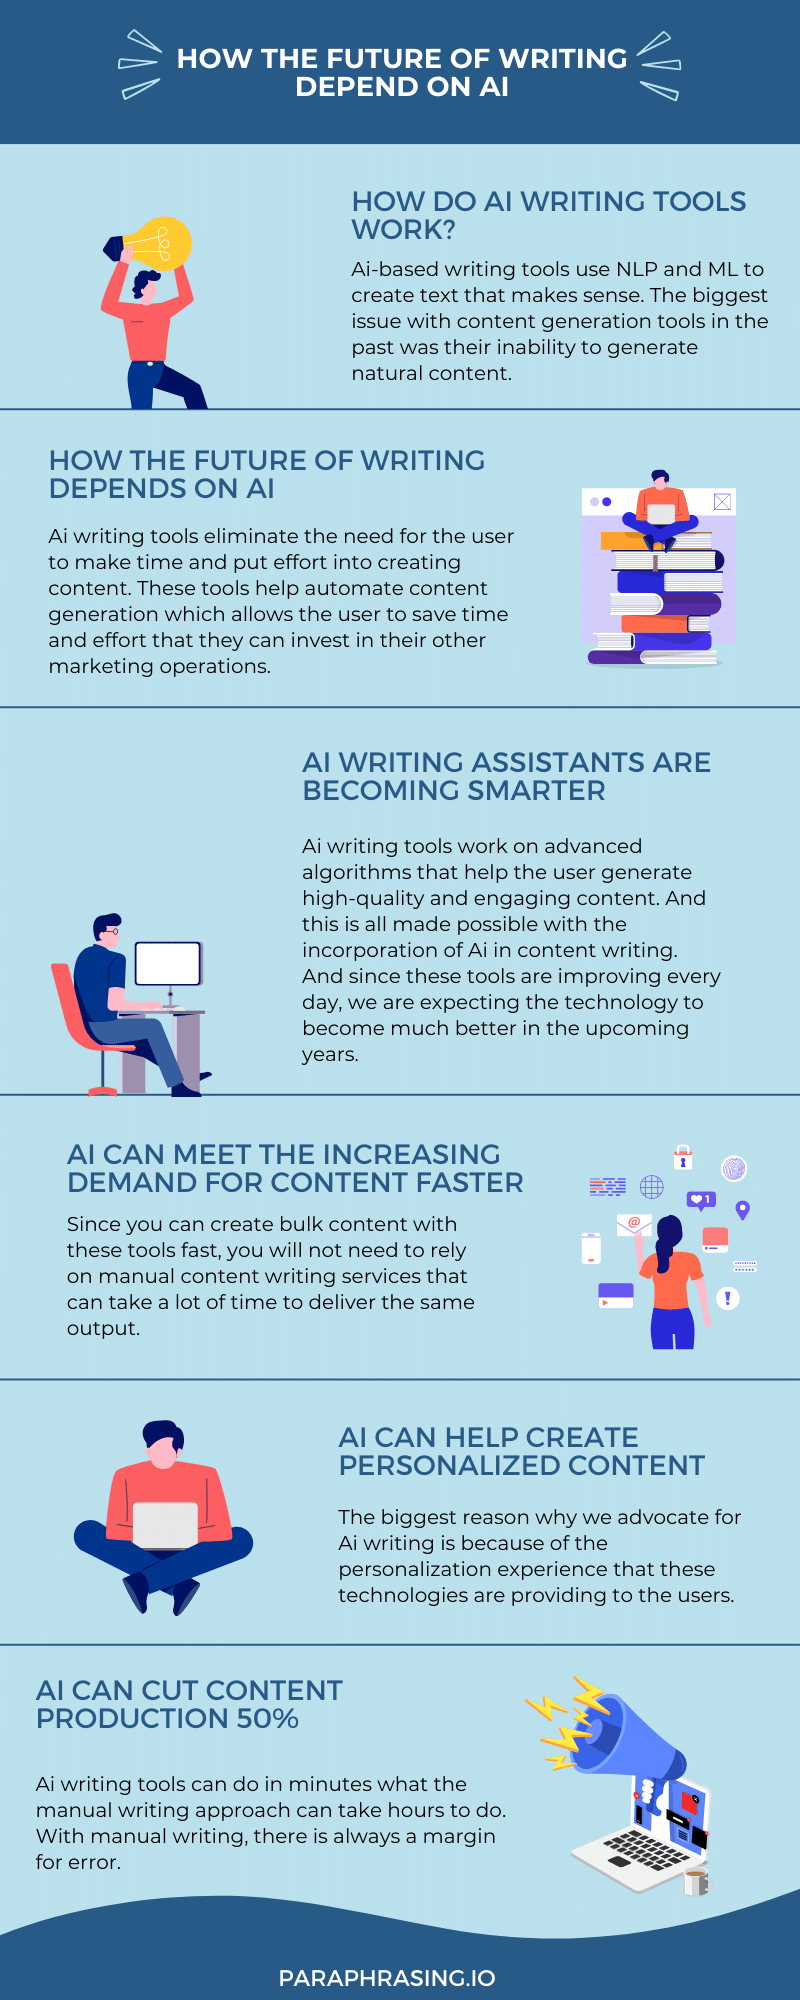 how-the-future-of-writing-depend-on-ai-infographic